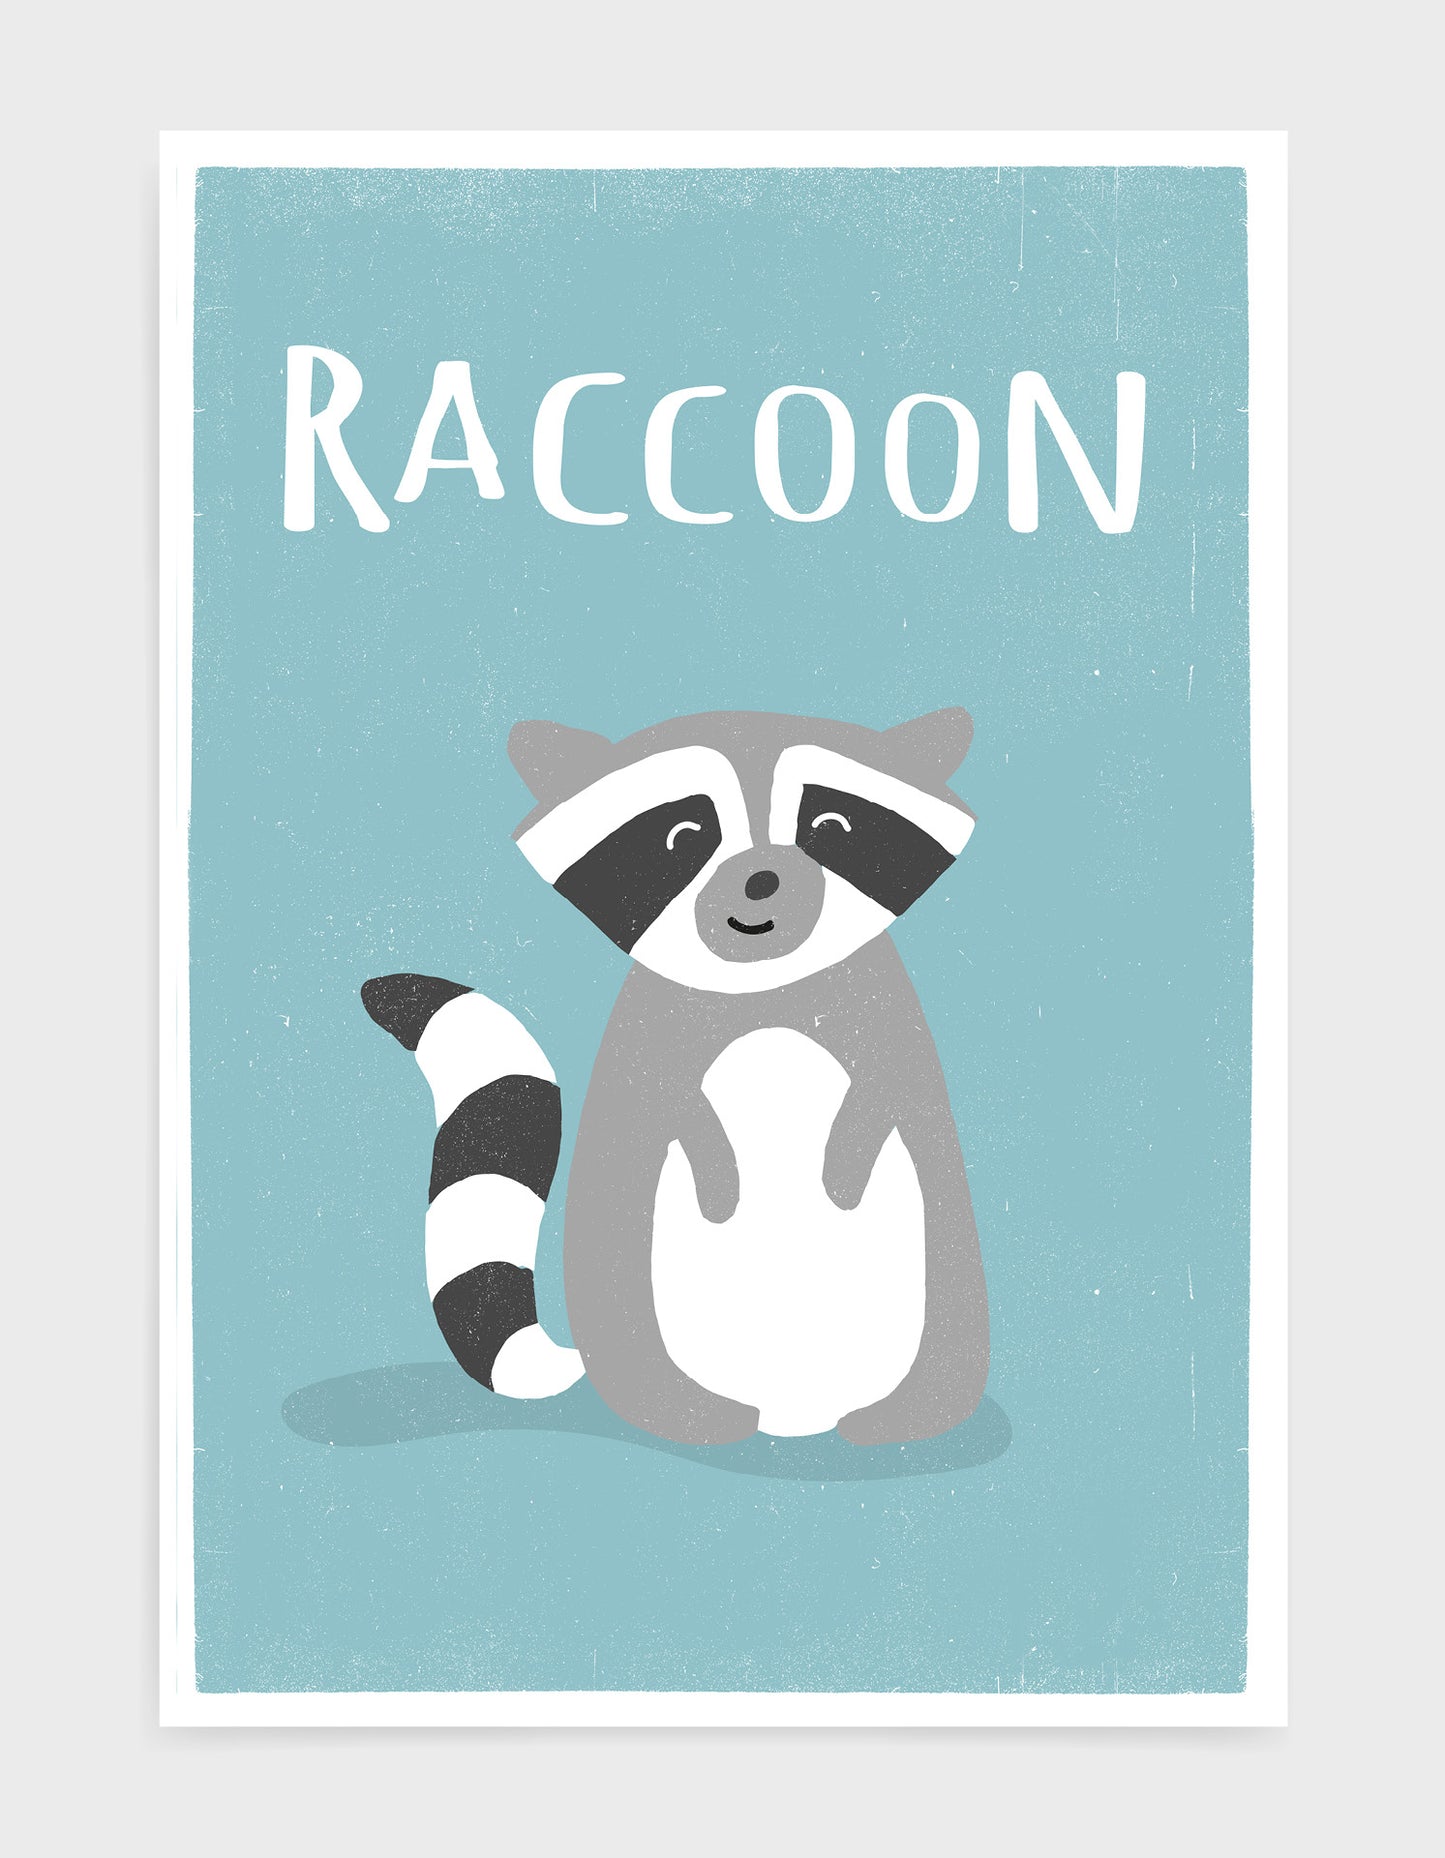 art print of a cute racoon on a light blue background with the word racoon above